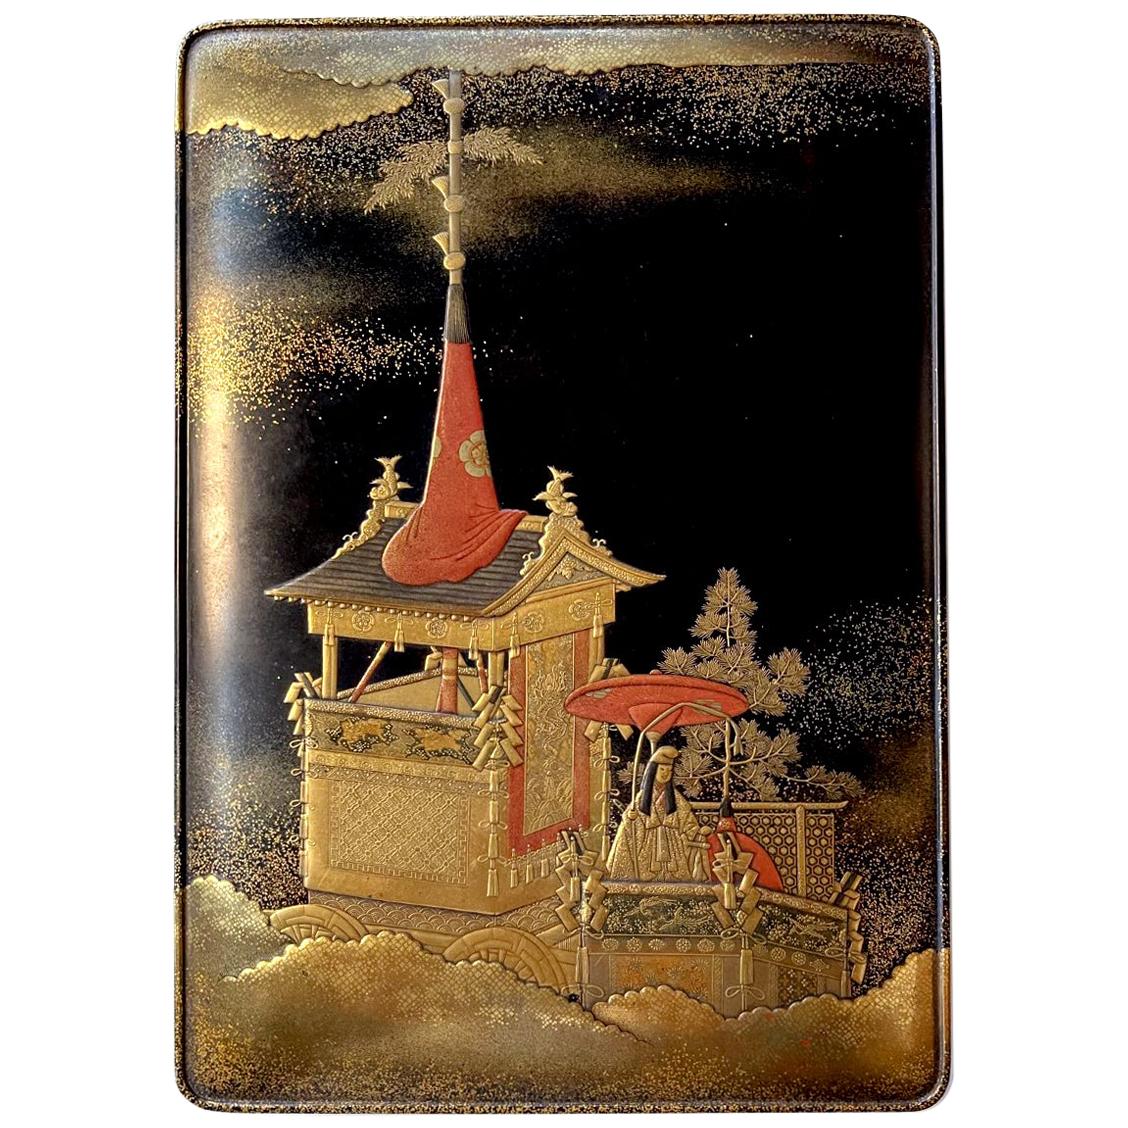 Exceptional Japanese Lacquer Suzuribako Edo Period with Provenance Note